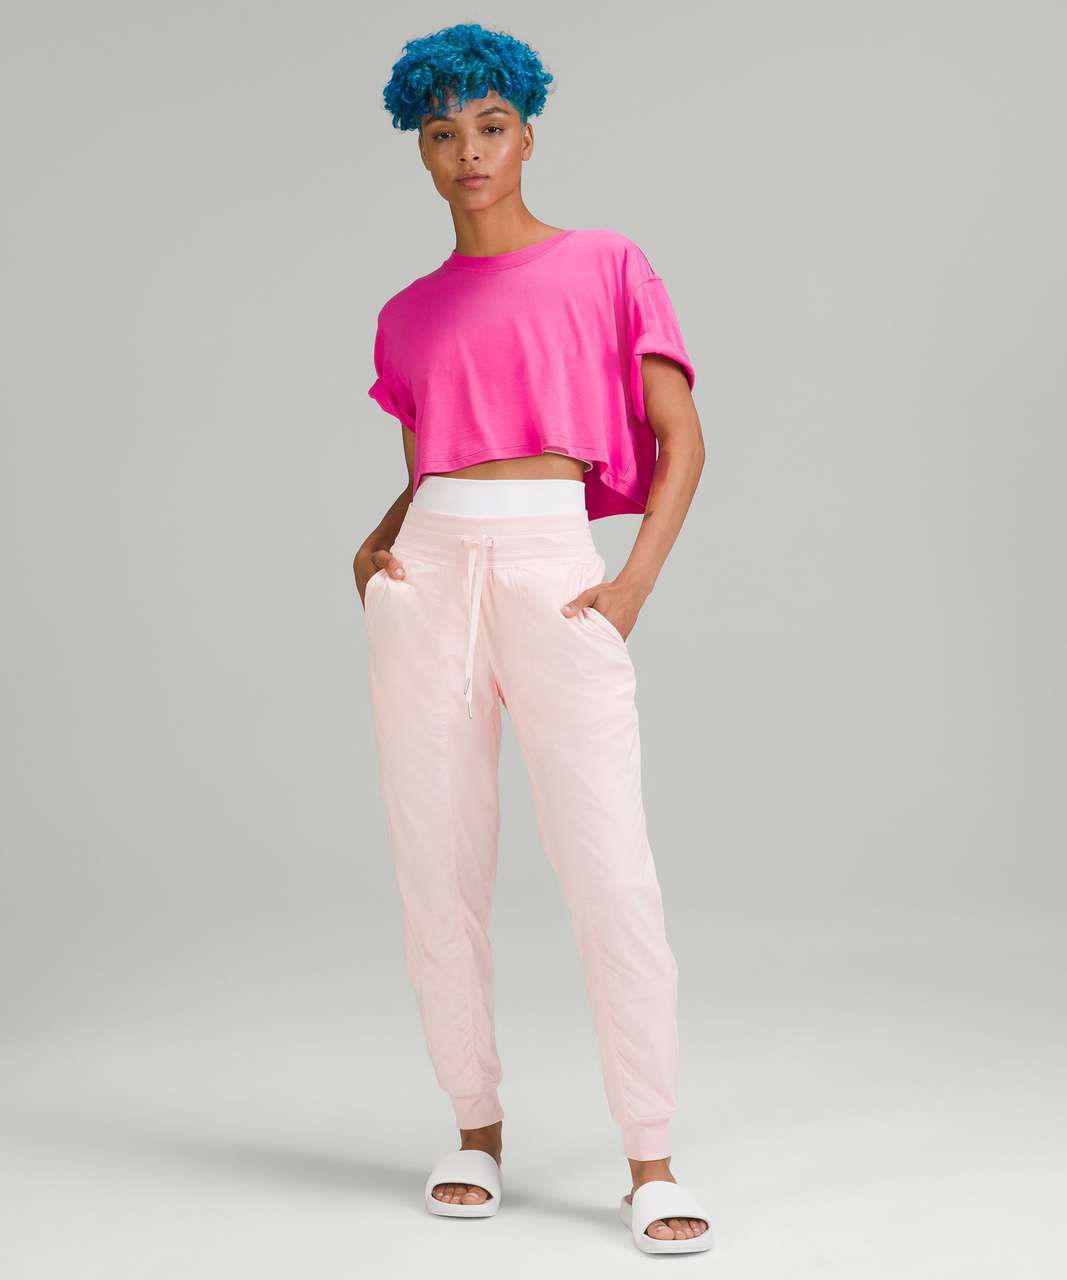 Lululemon Ready To Rulu Joggers Strawberry Milkshake 4 - $130 New With Tags  - From Sofia